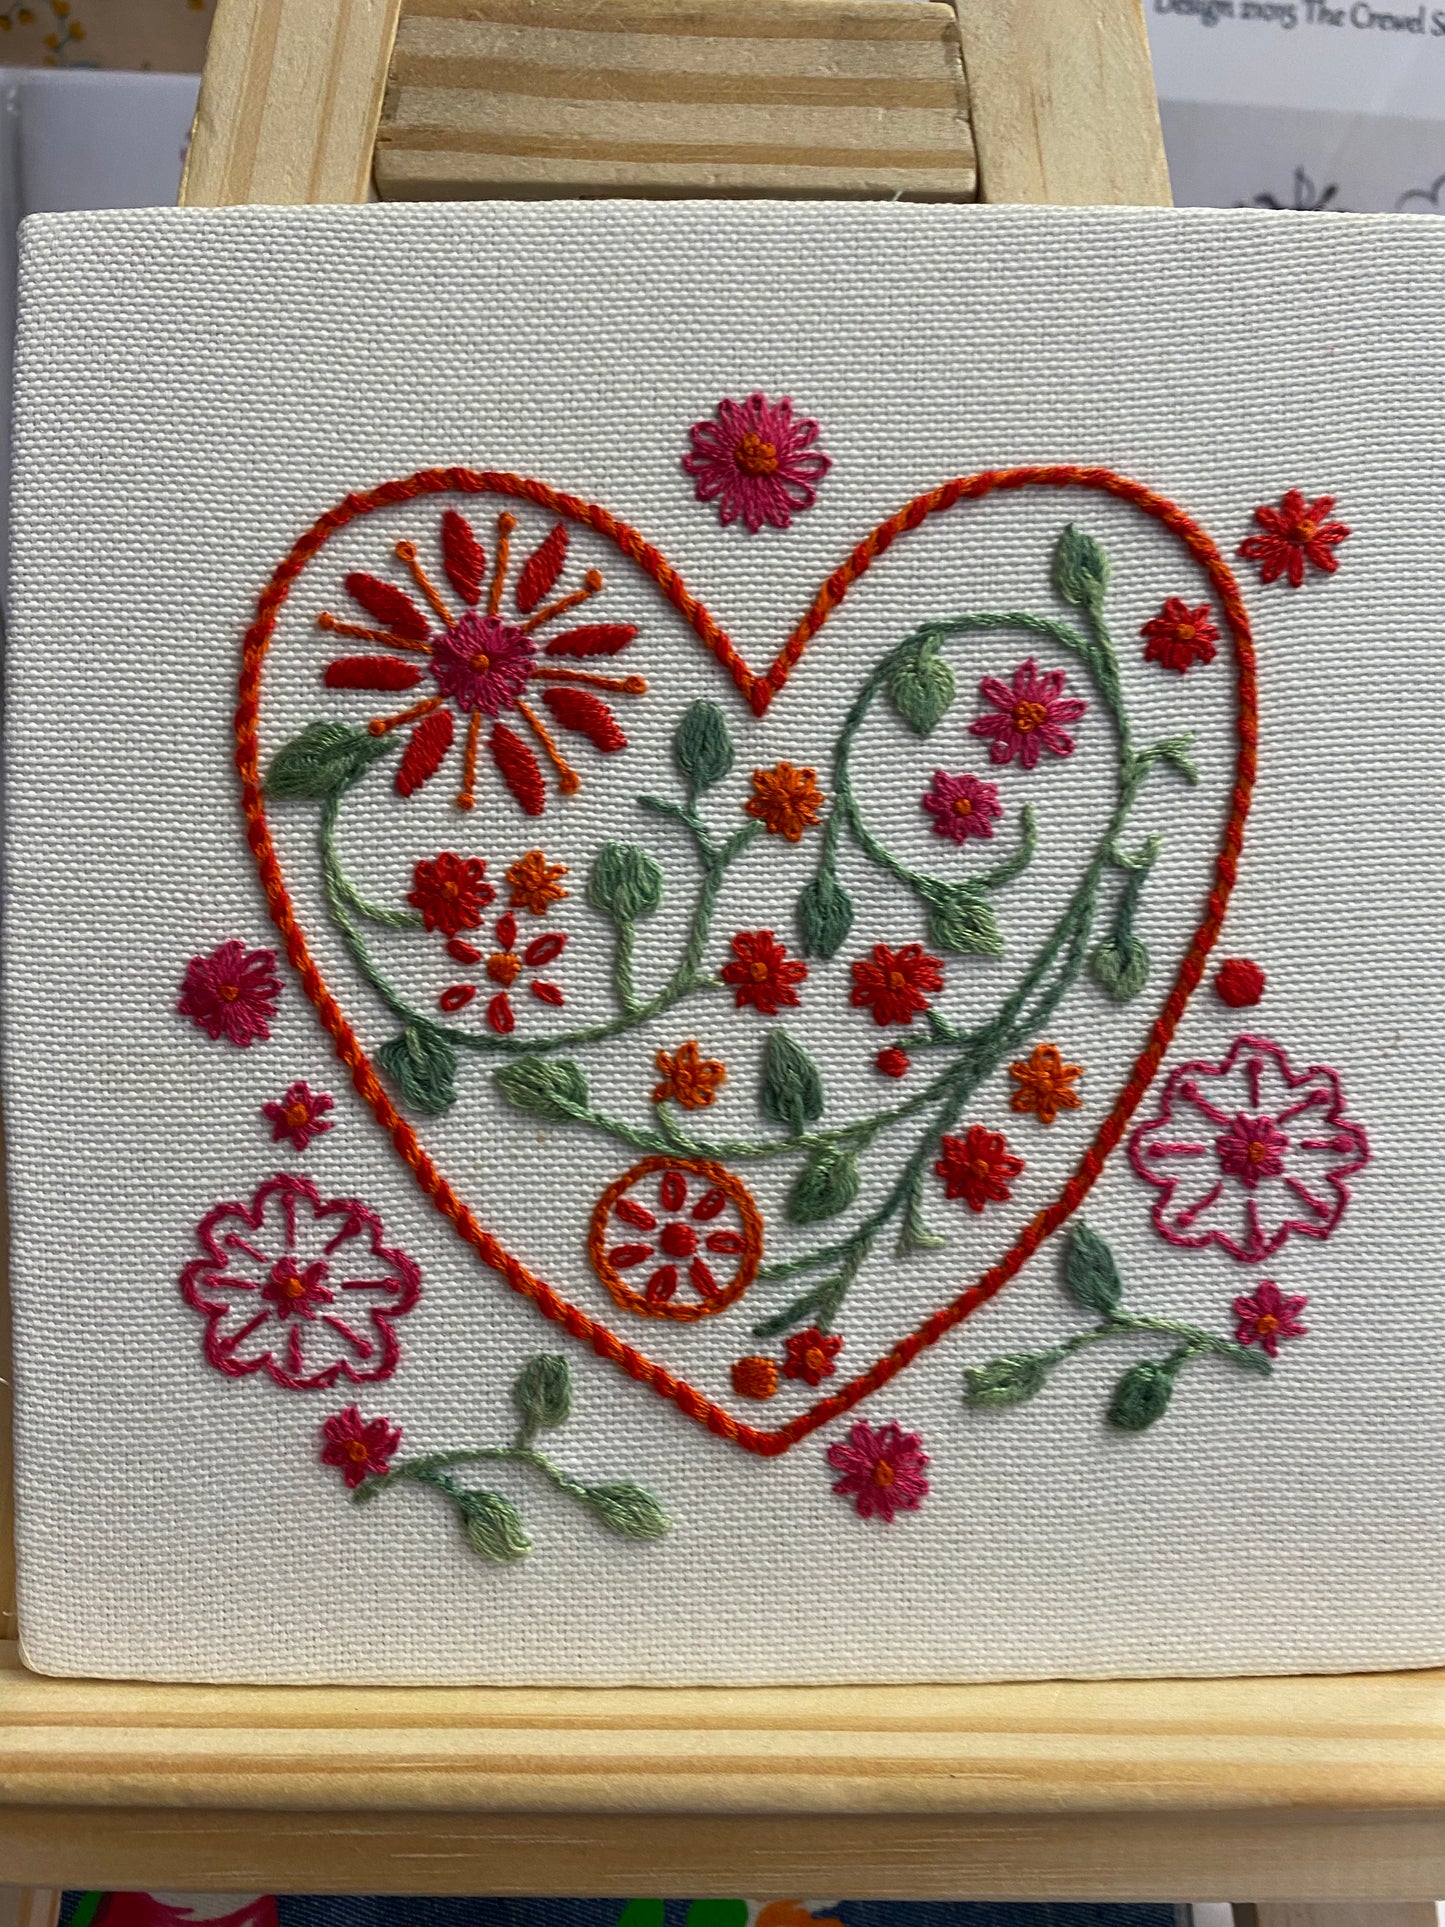 My Valentine - Lovely Embroidery Project by Dizzy & Creative